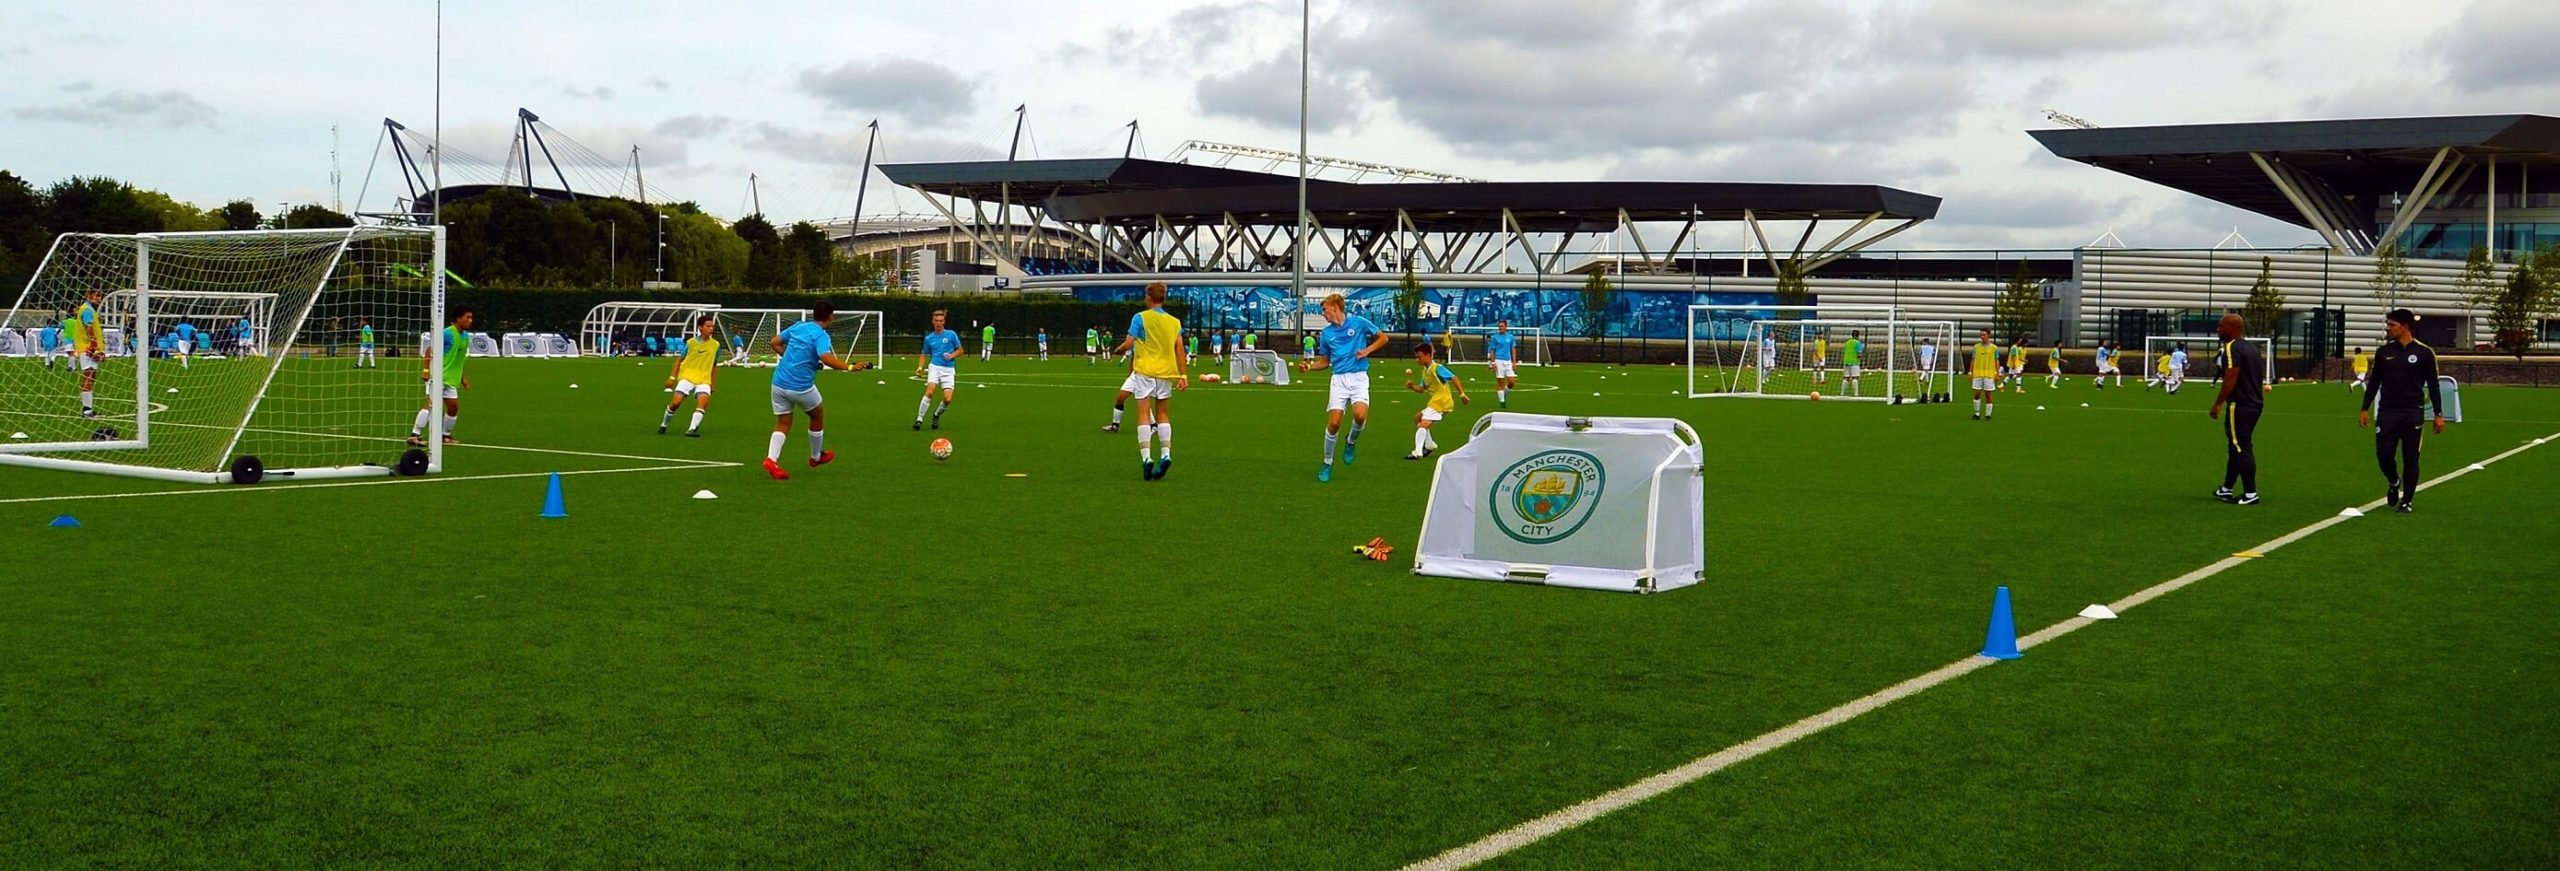 22 Europe International Soccer Academy Training Experience During The Summer